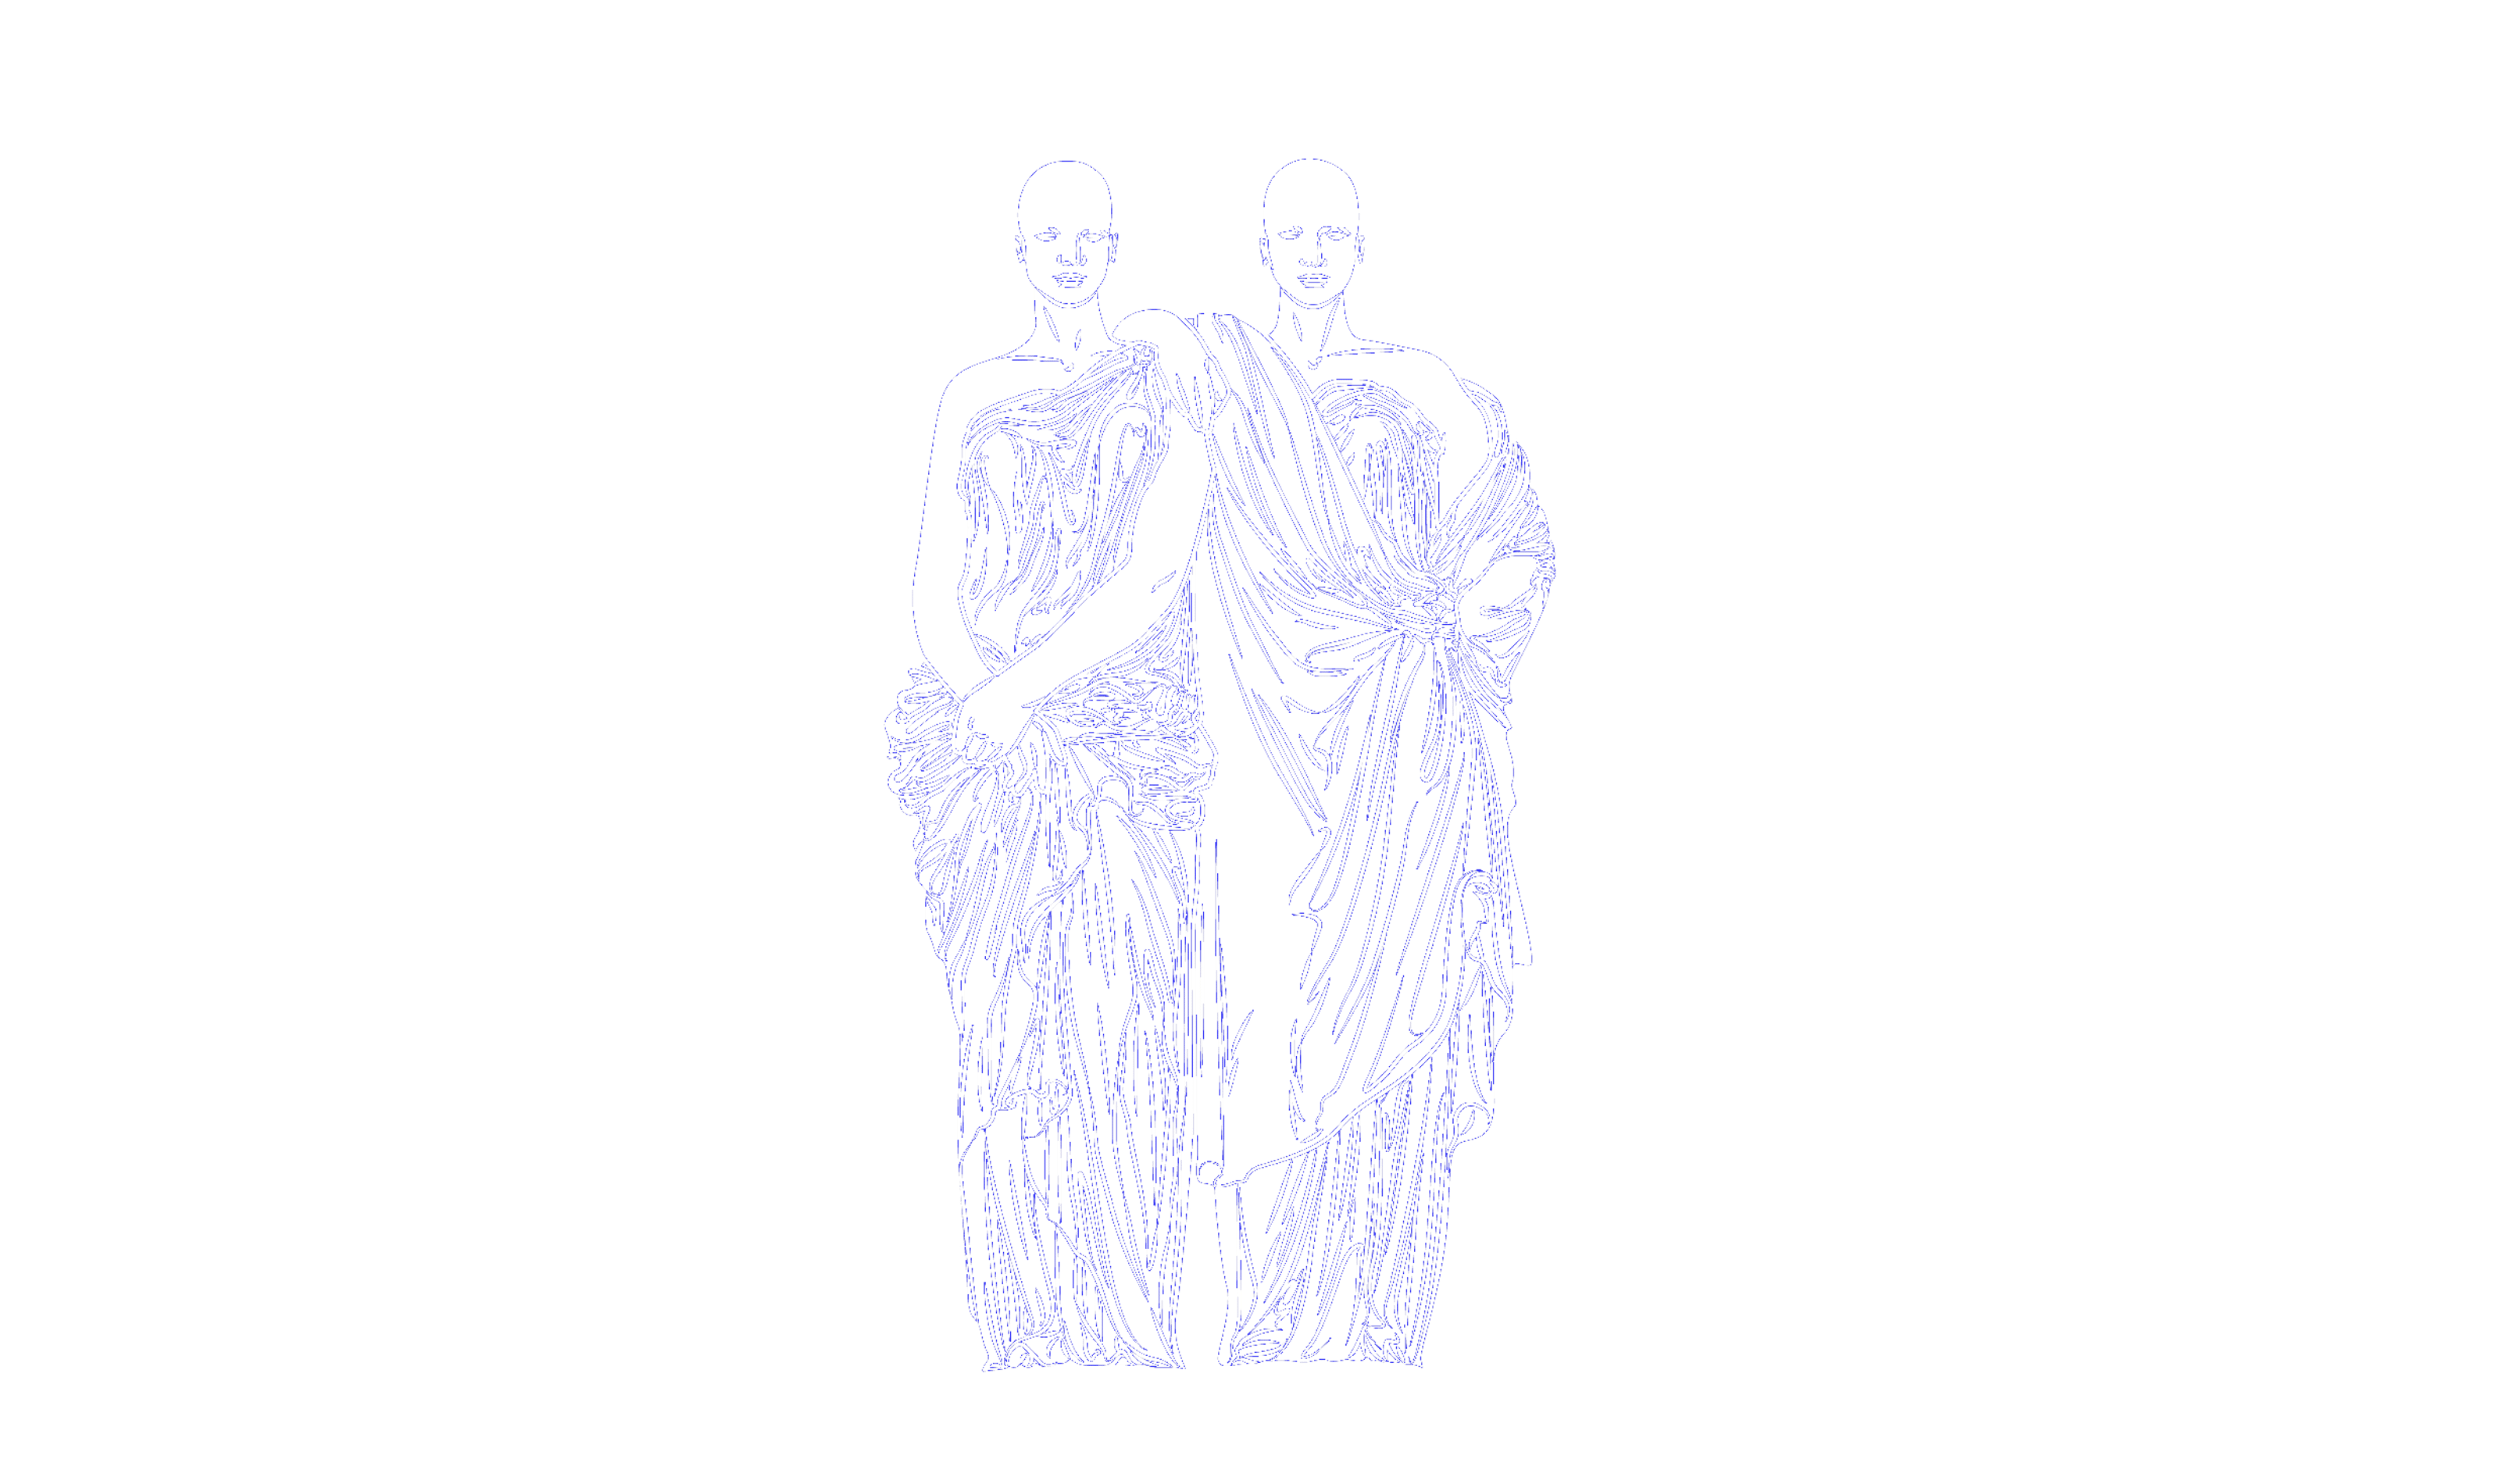 Two figures with one putting their arm over the other.